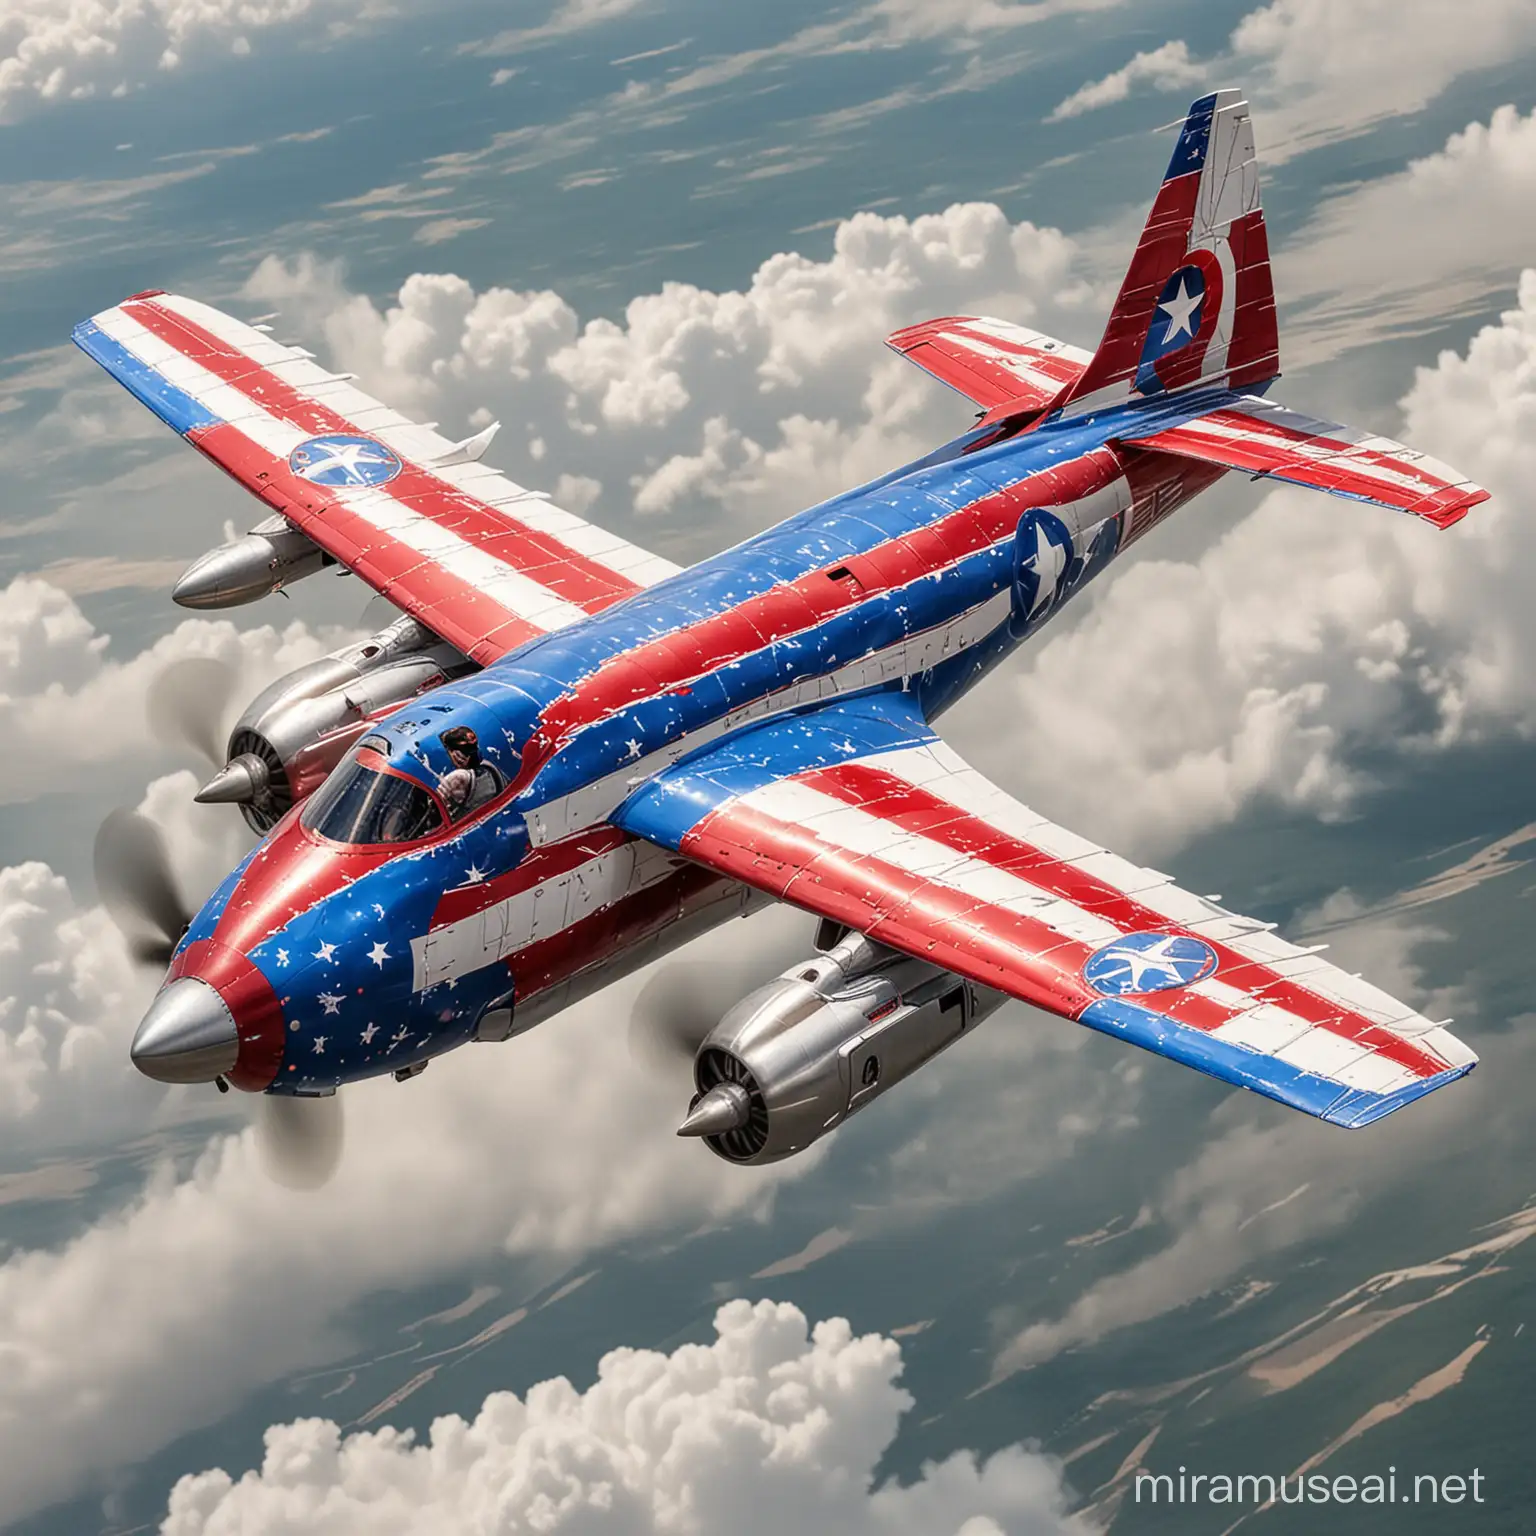 Captain America Inspired Airplane Flying High in the Sky